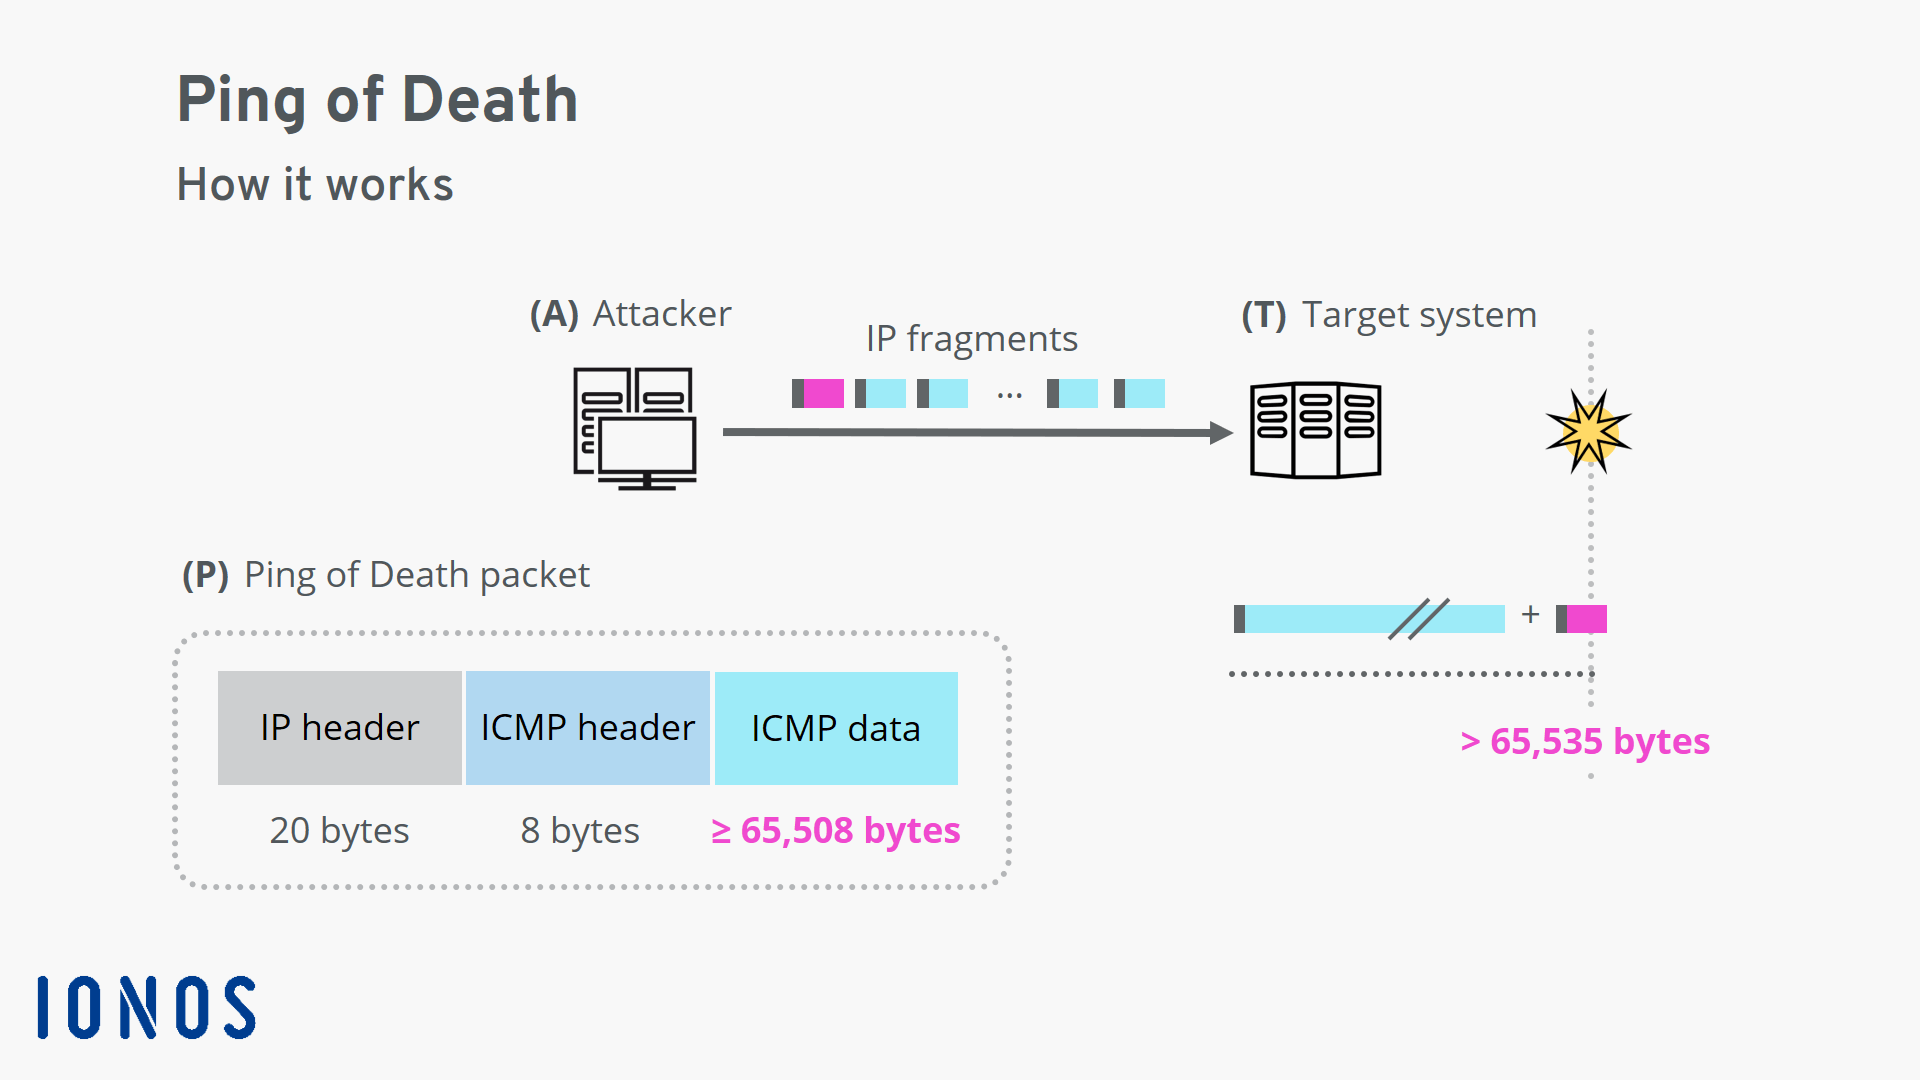 How a ping of death works